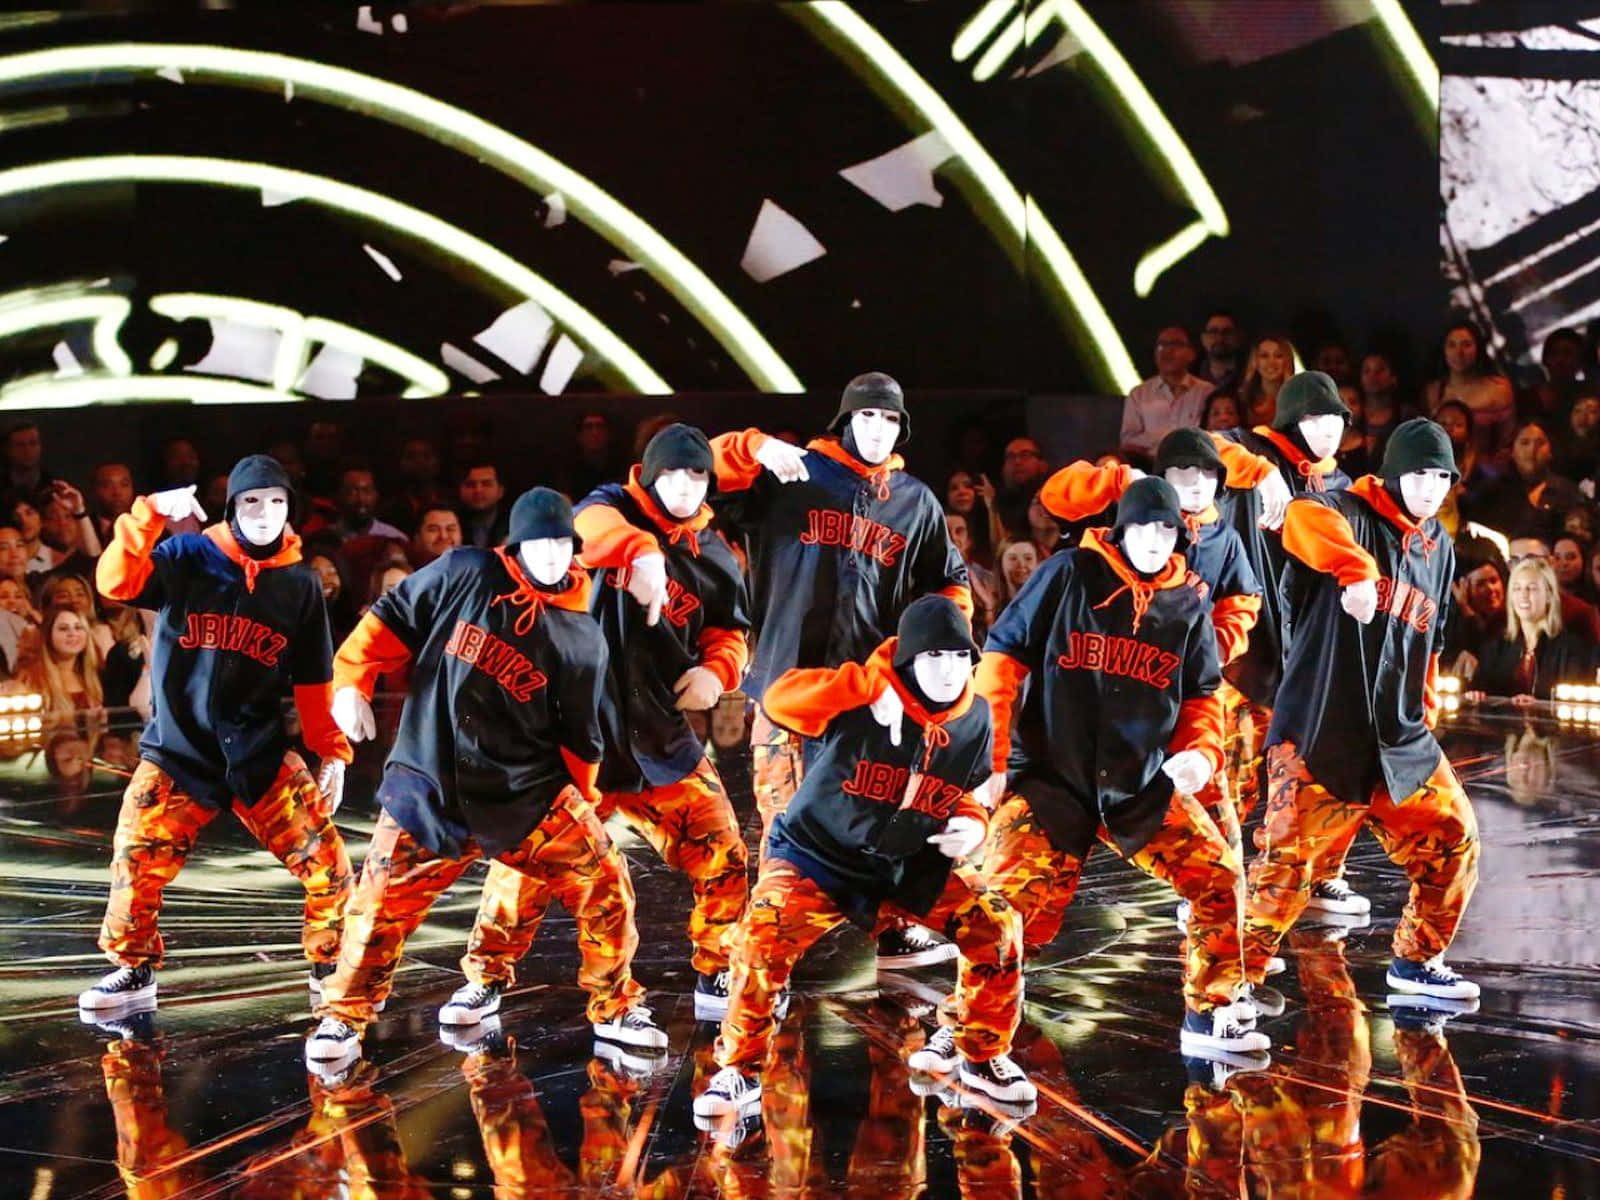 A Group Of Dancers In Orange And Black Outfits Background